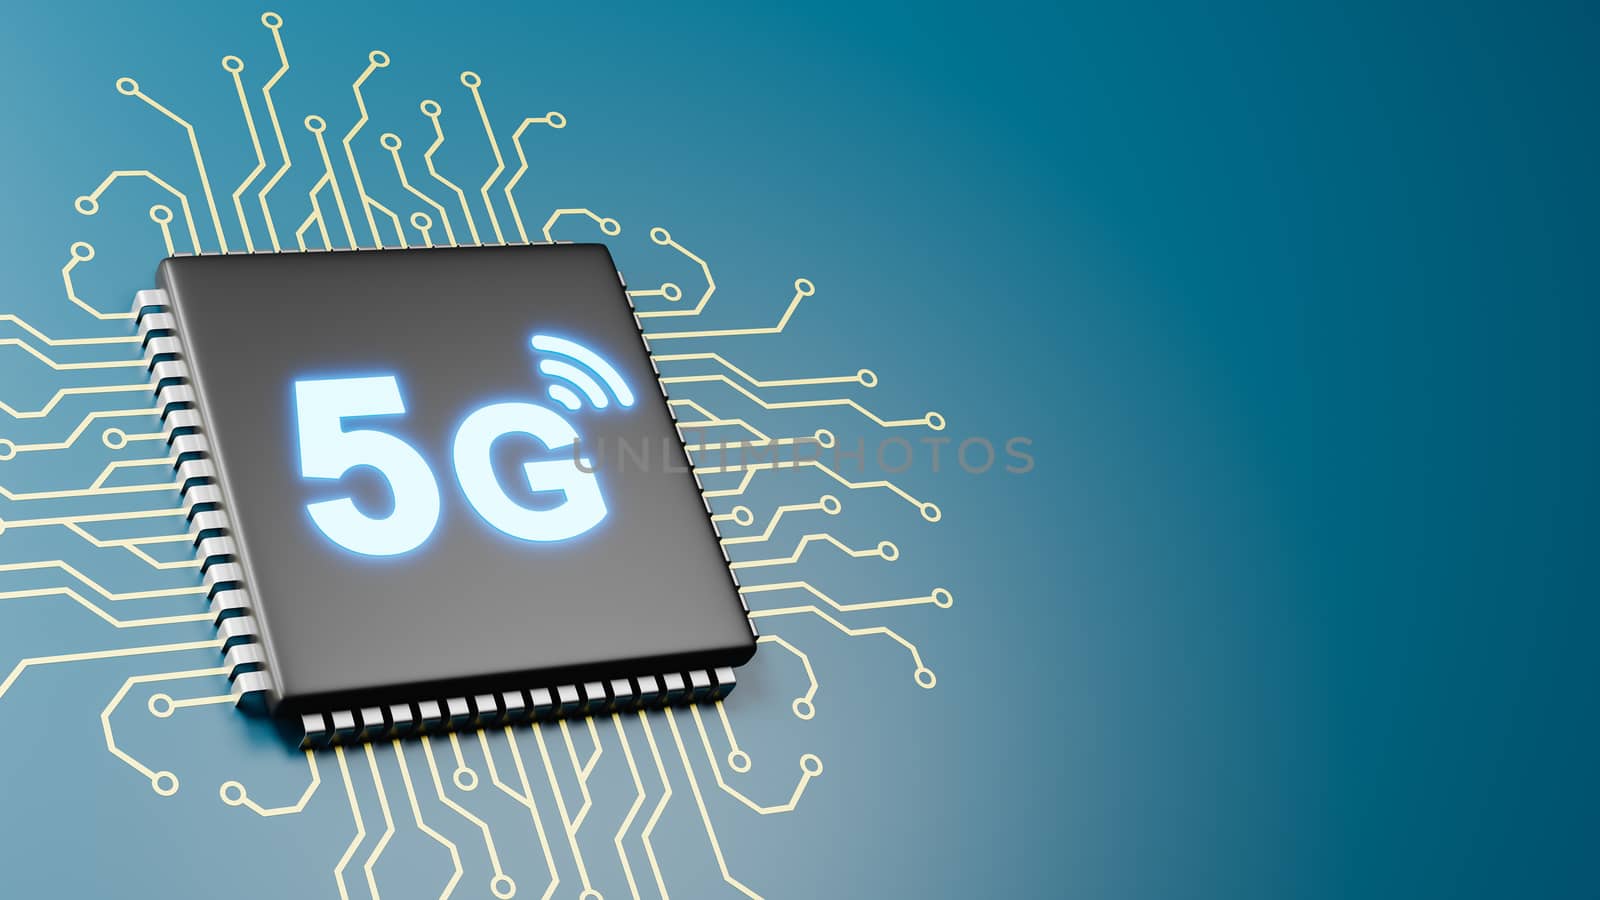 Computer Processor with 5G Text 3D Illustration on Blue Background with Copy Space, 5G Technology Concept